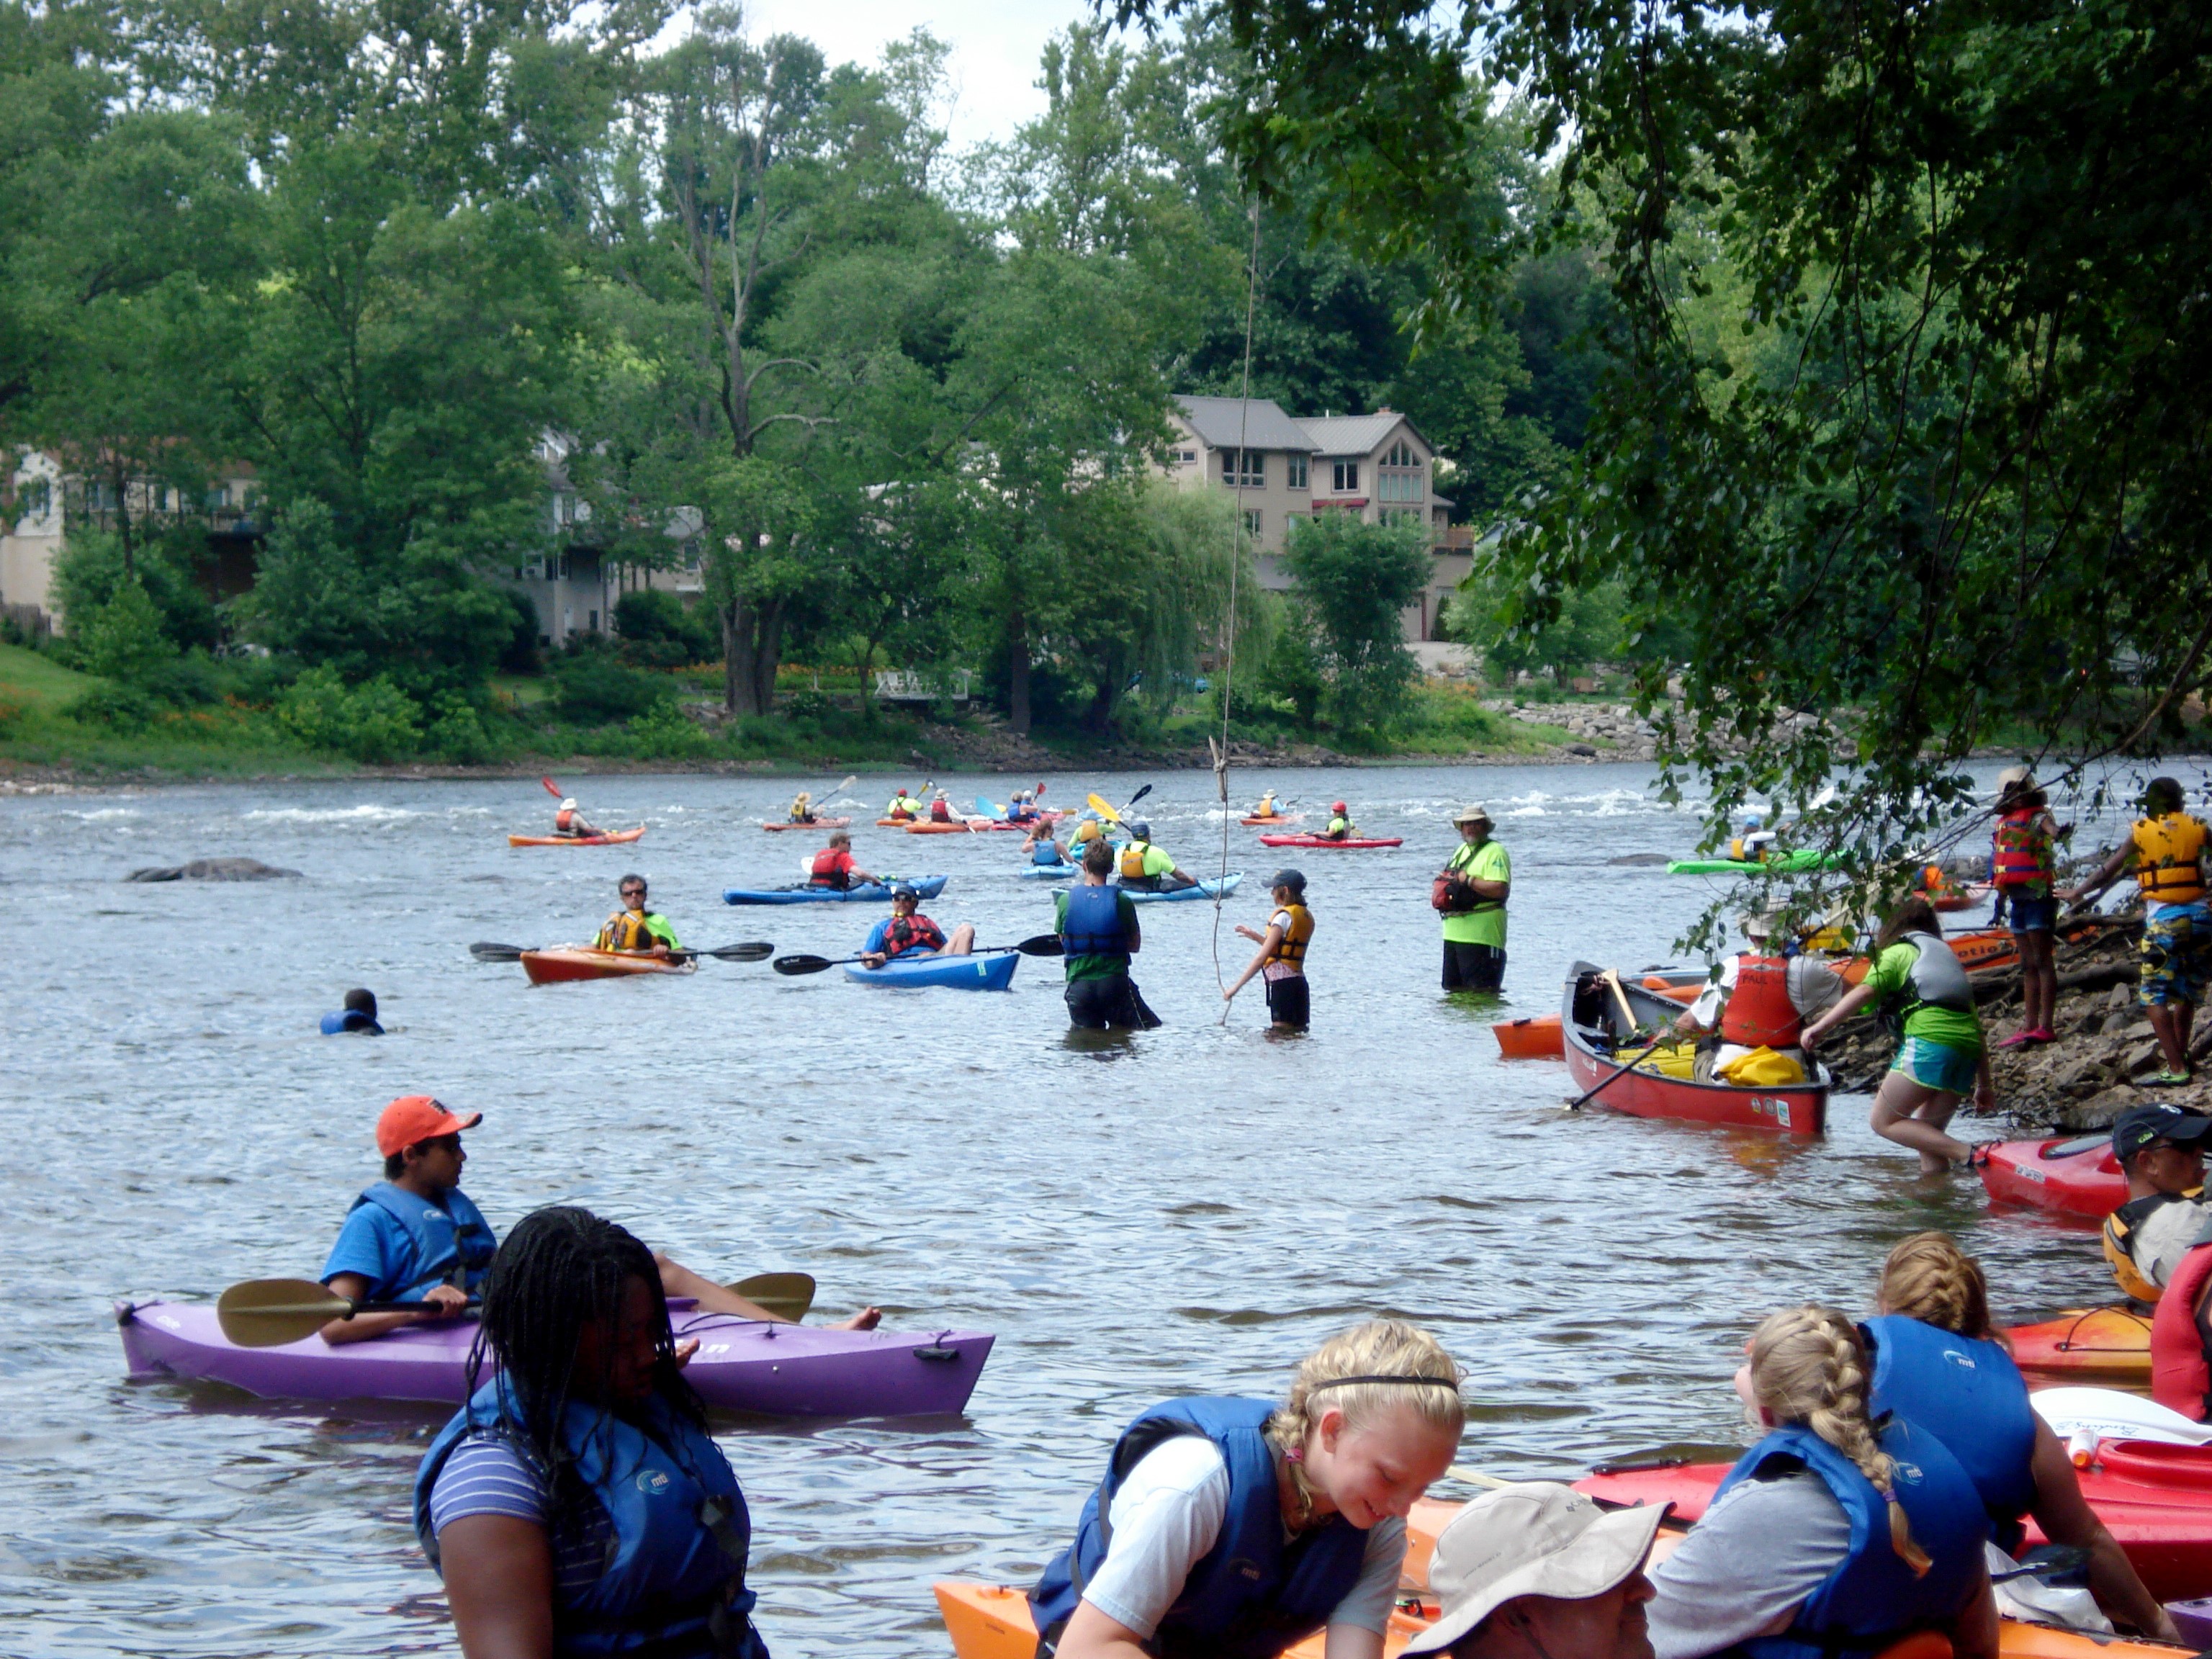 Sojourners stop for a play/swim break on the lower Delaware River. Photo by the DRBC.